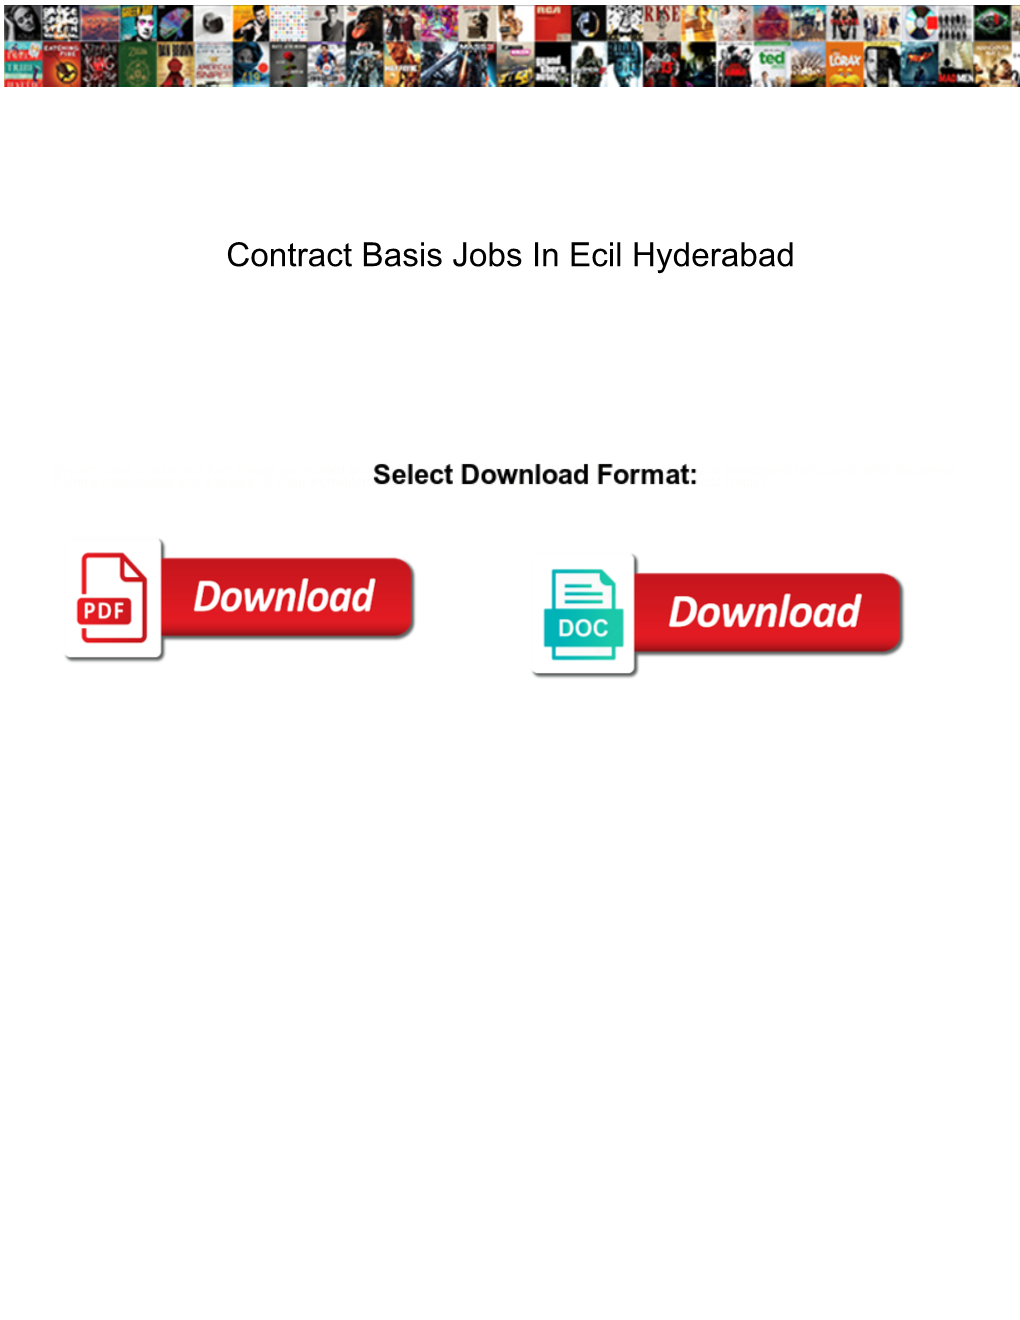 Contract Basis Jobs in Ecil Hyderabad